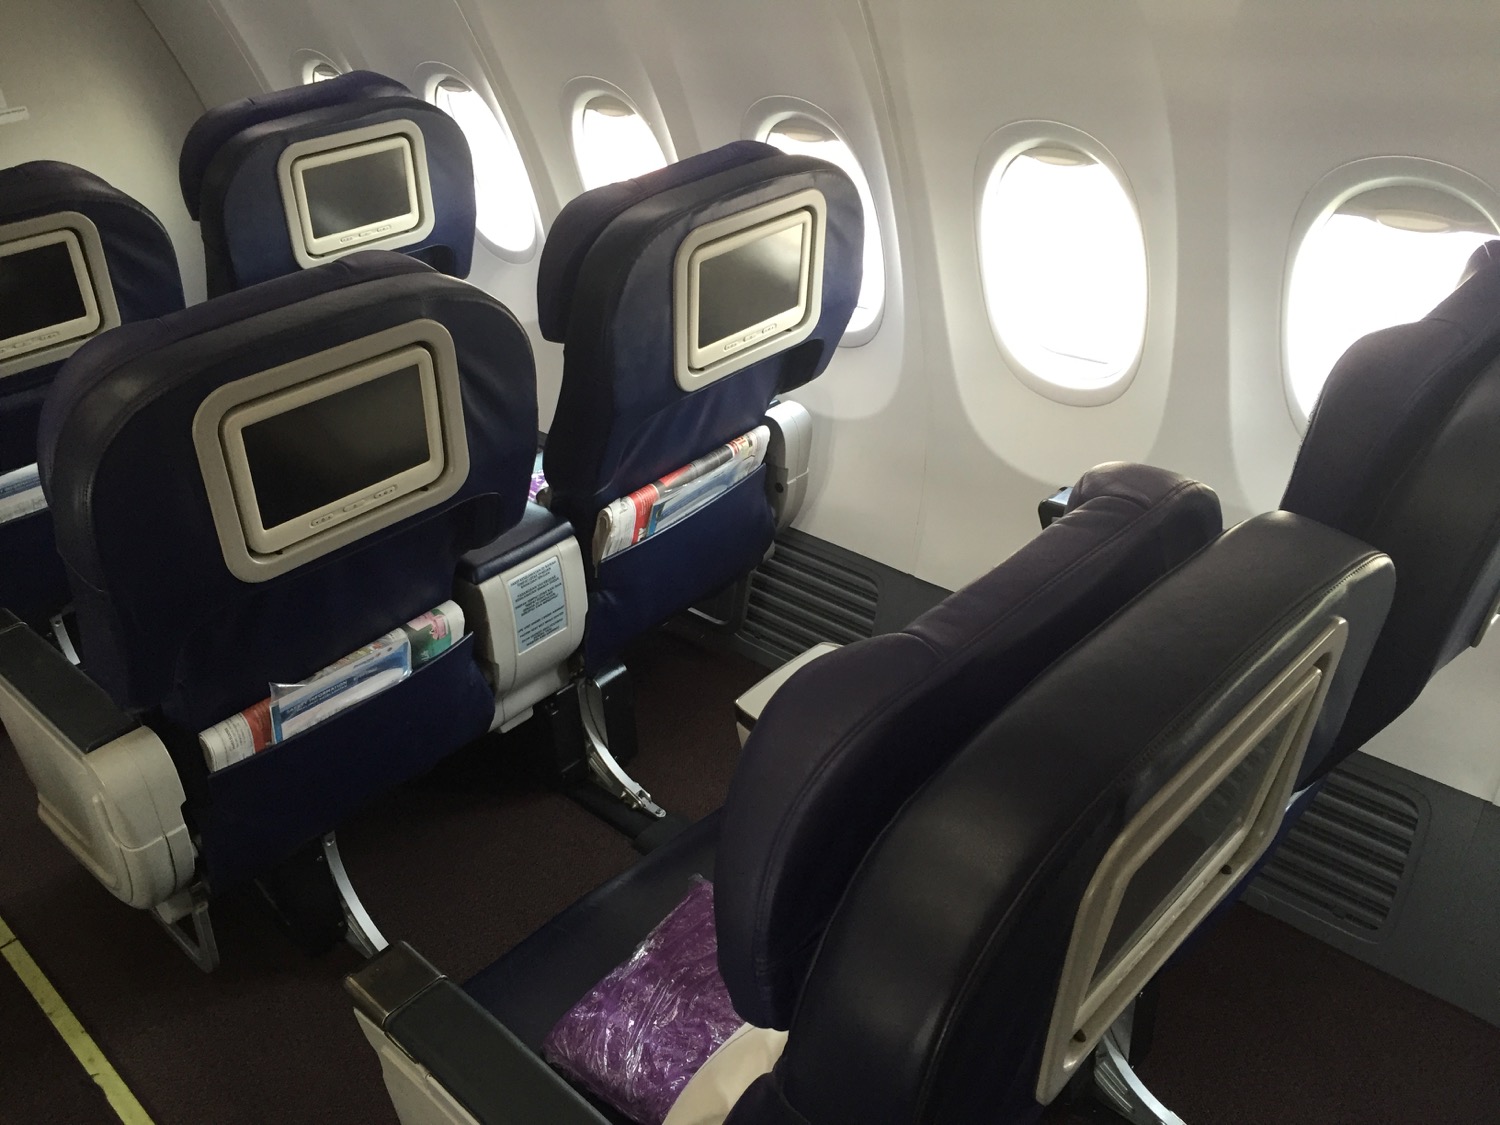 seats in an airplane with windows